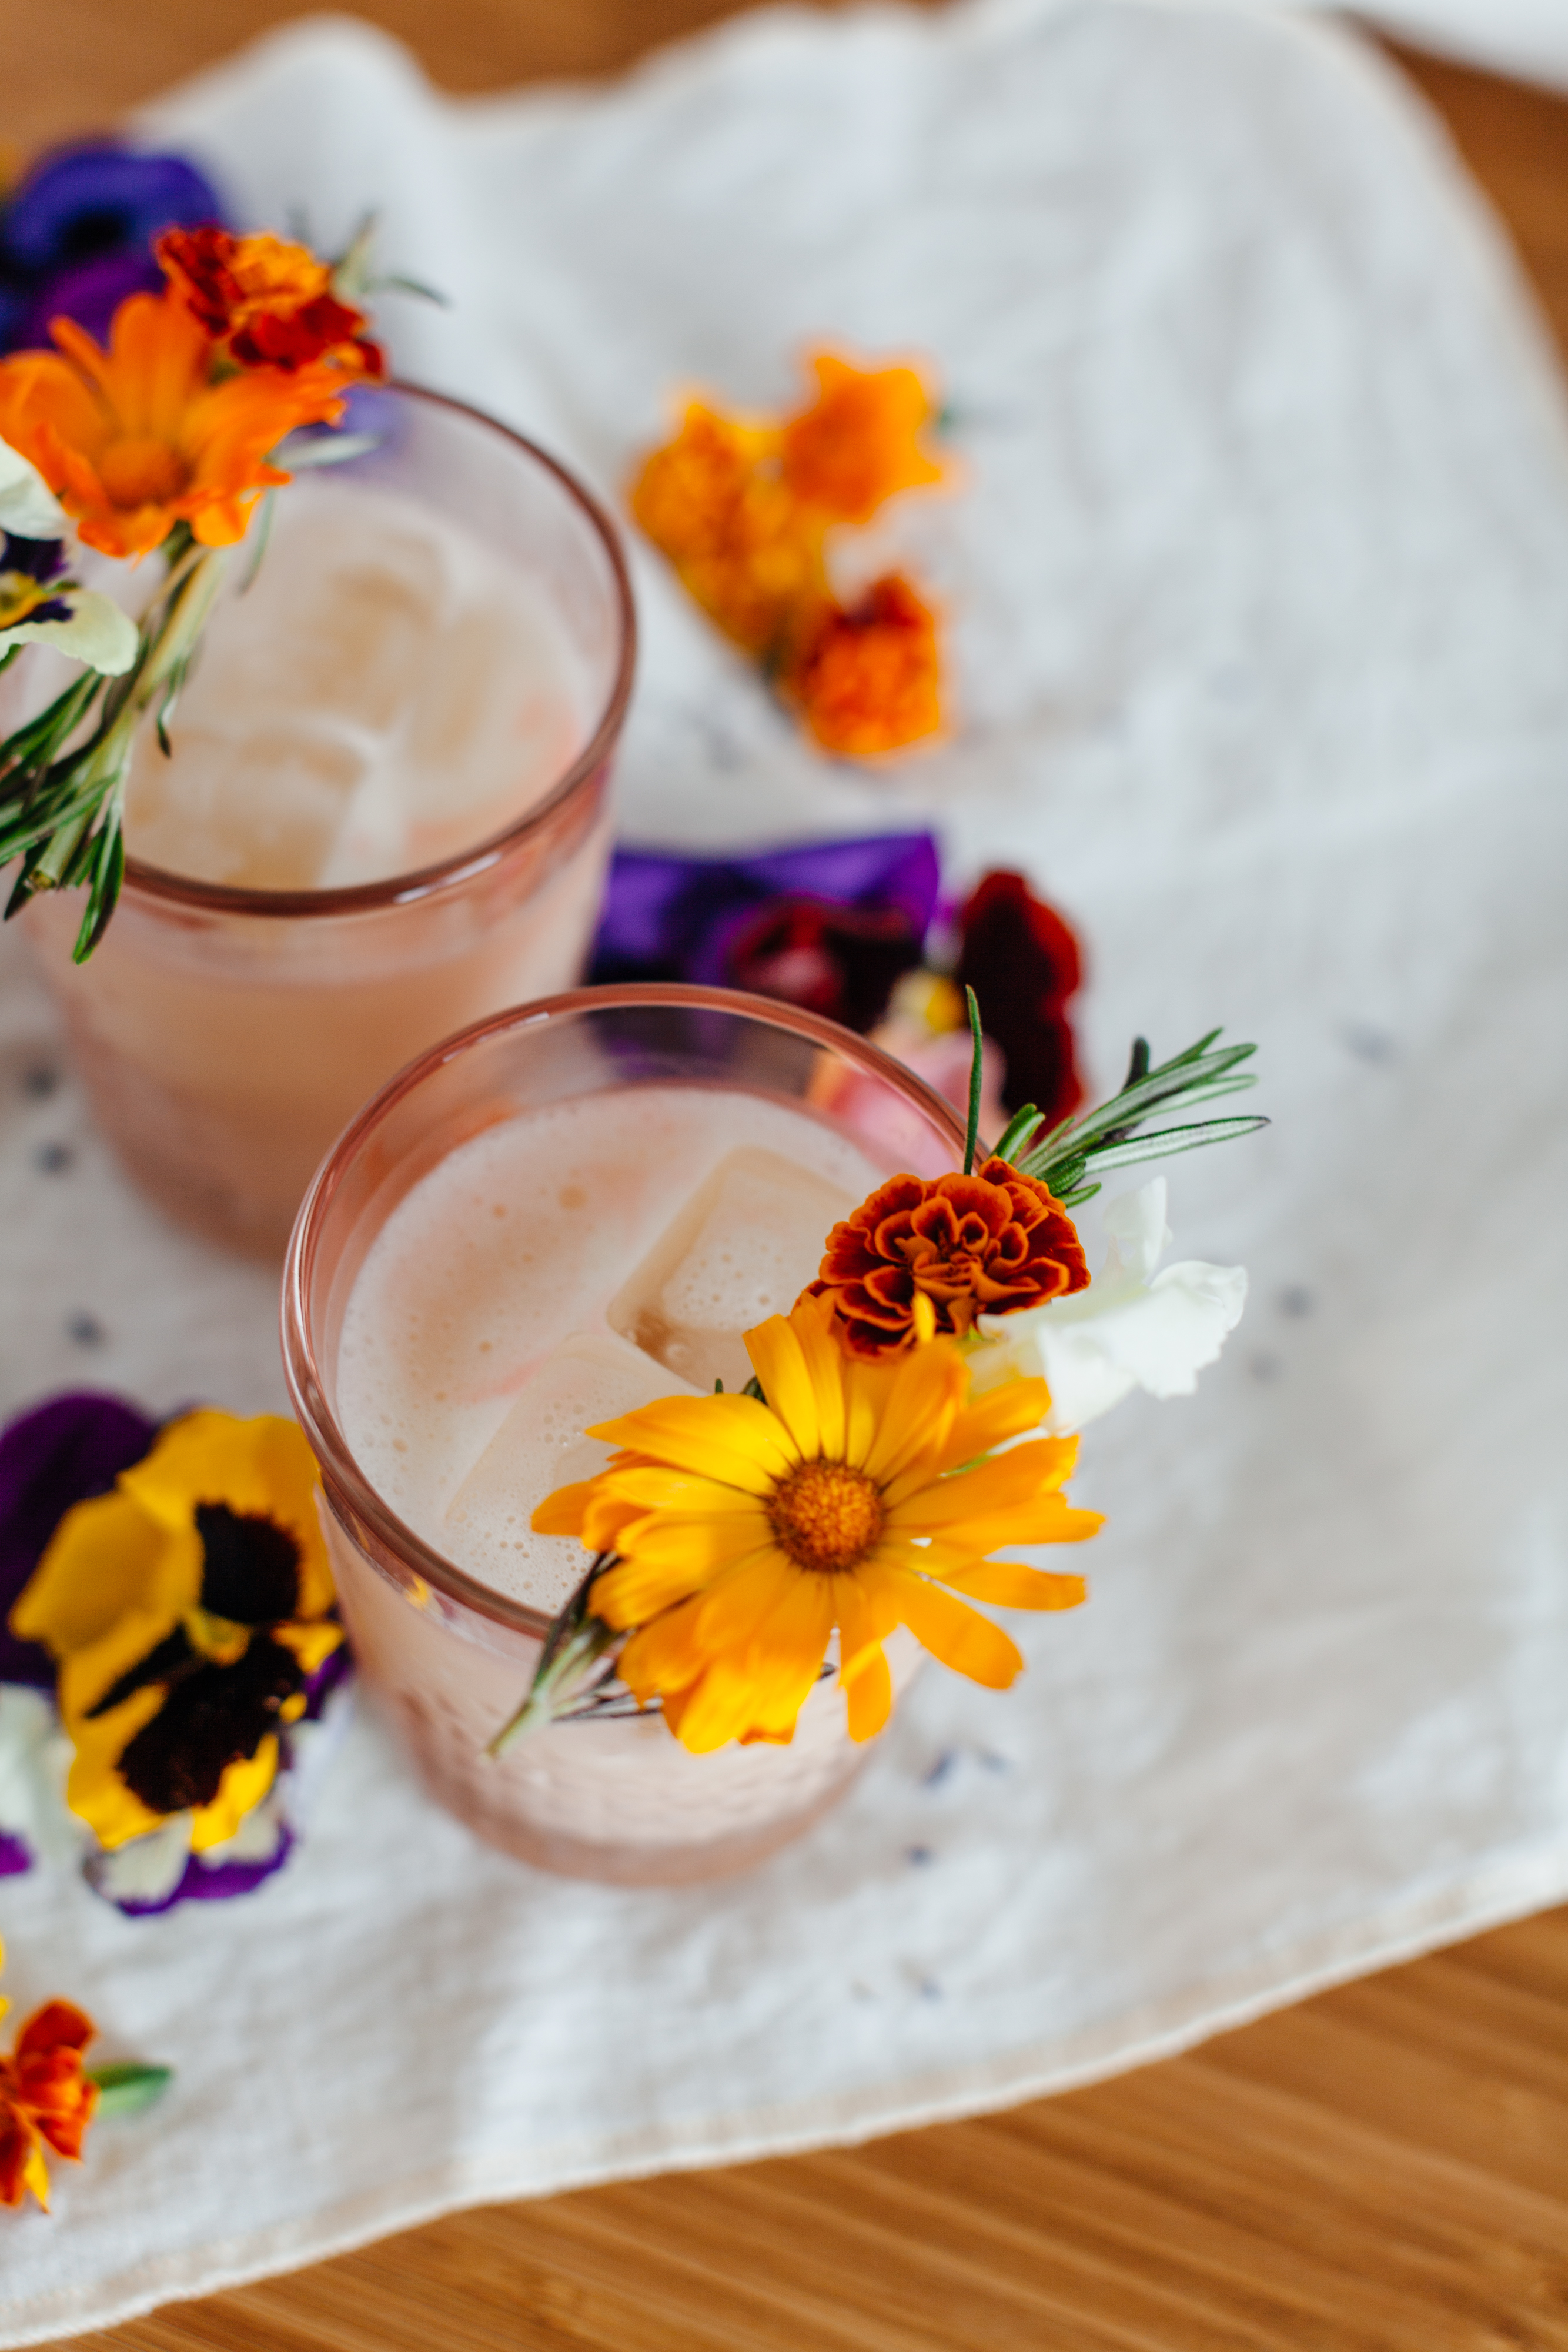 A Lavender Milk Punch recipe just in time for the sunny spring weather! | bygabriella.co